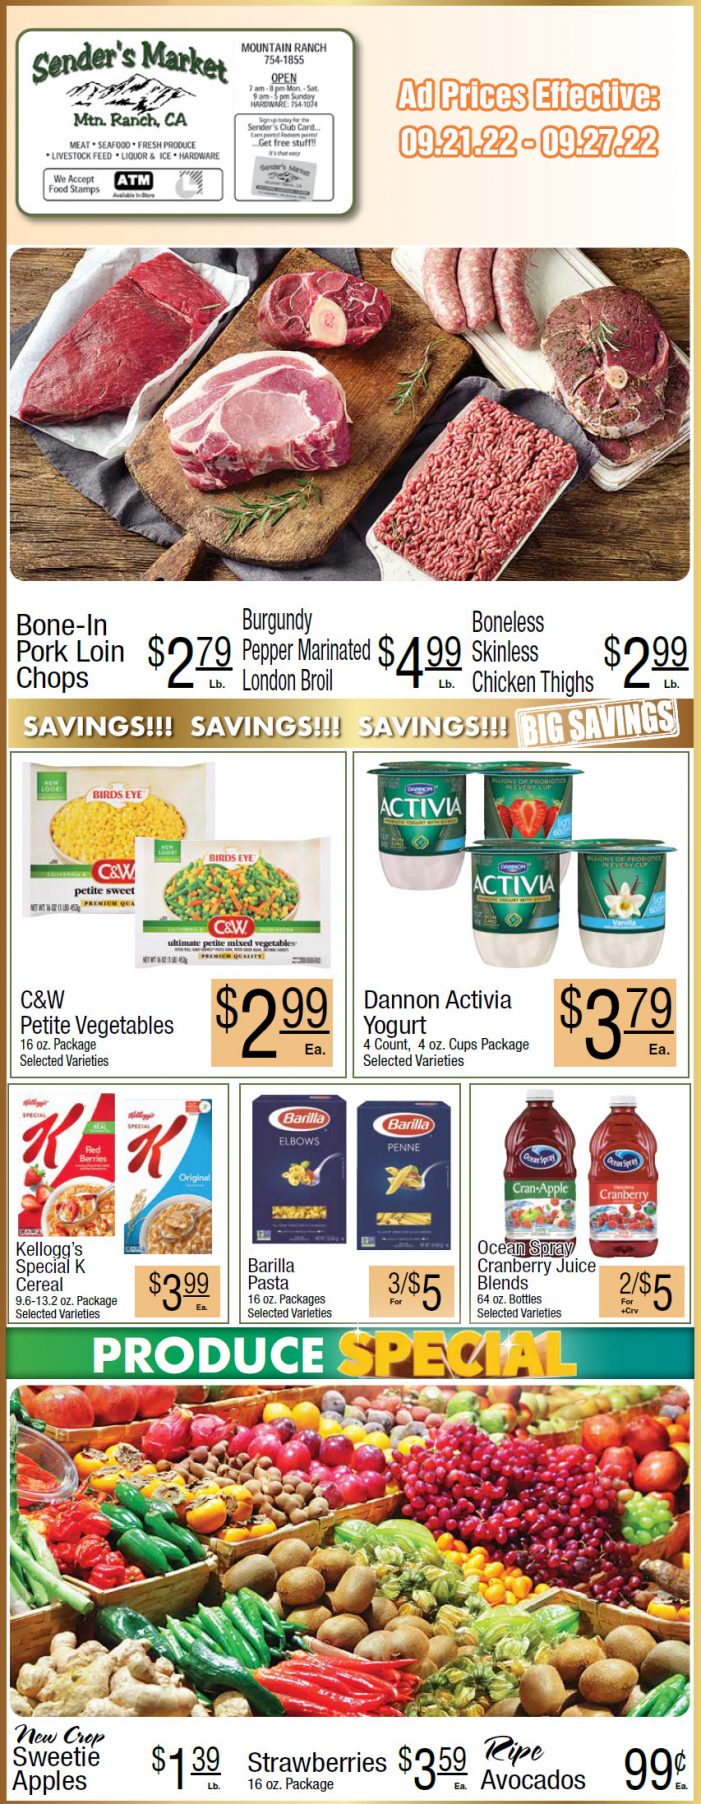 Sender’s Market Weekly Ad & Grocery Specials Through September 27th! Shop Local & Save!